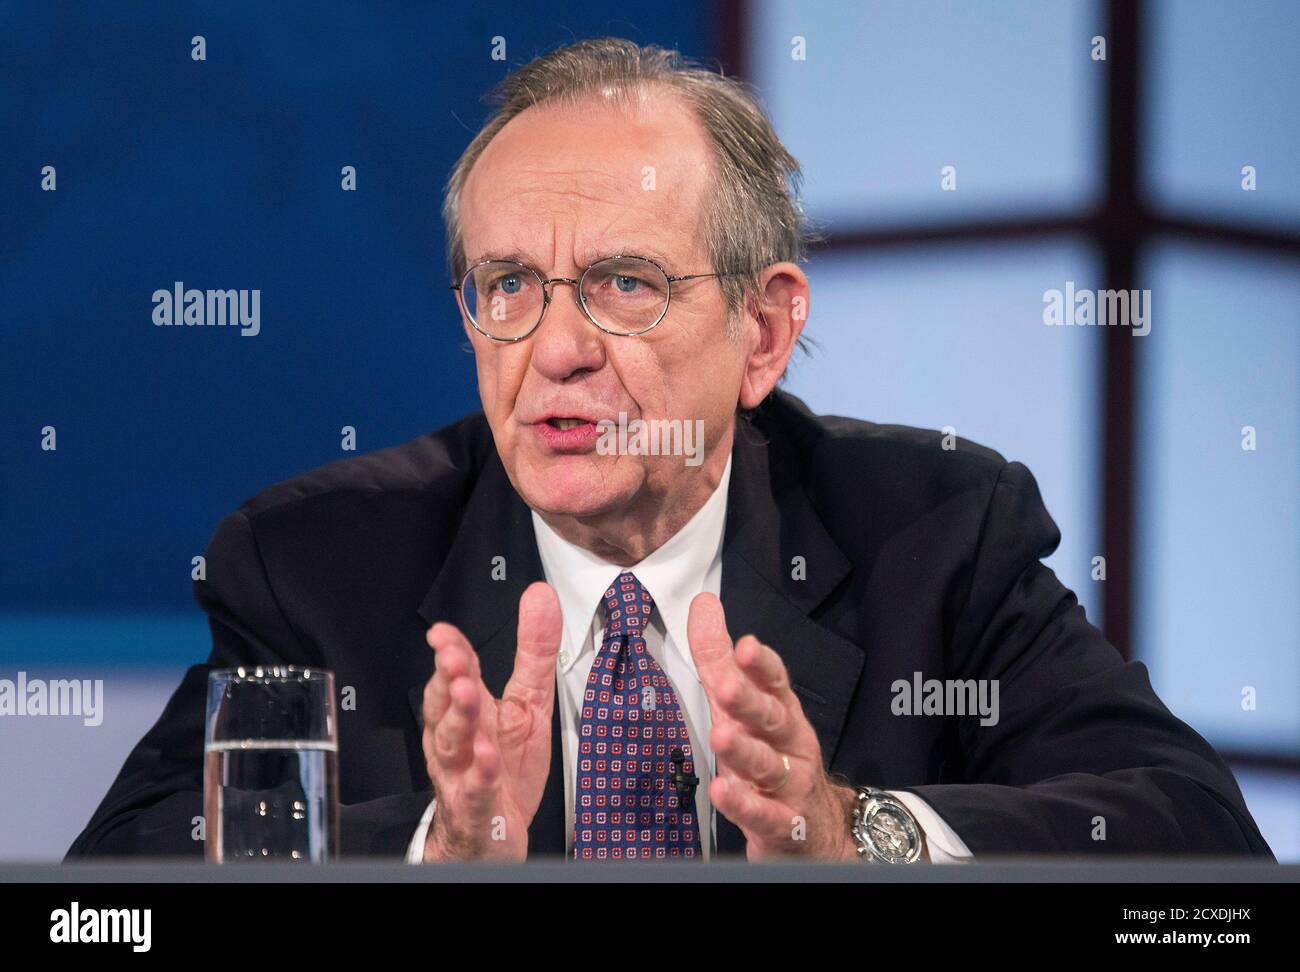 Italy's Minister of Economy and Finance Pier Carlo Padoan speaks during a discussion on 'A Reform Agenda for Europe's Leaders' during the World Bank/IMF annual meetings in Washington October 9, 2014.      REUTERS/Joshua Roberts    (UNITED STATES - Tags: POLITICS BUSINESS) Stock Photo